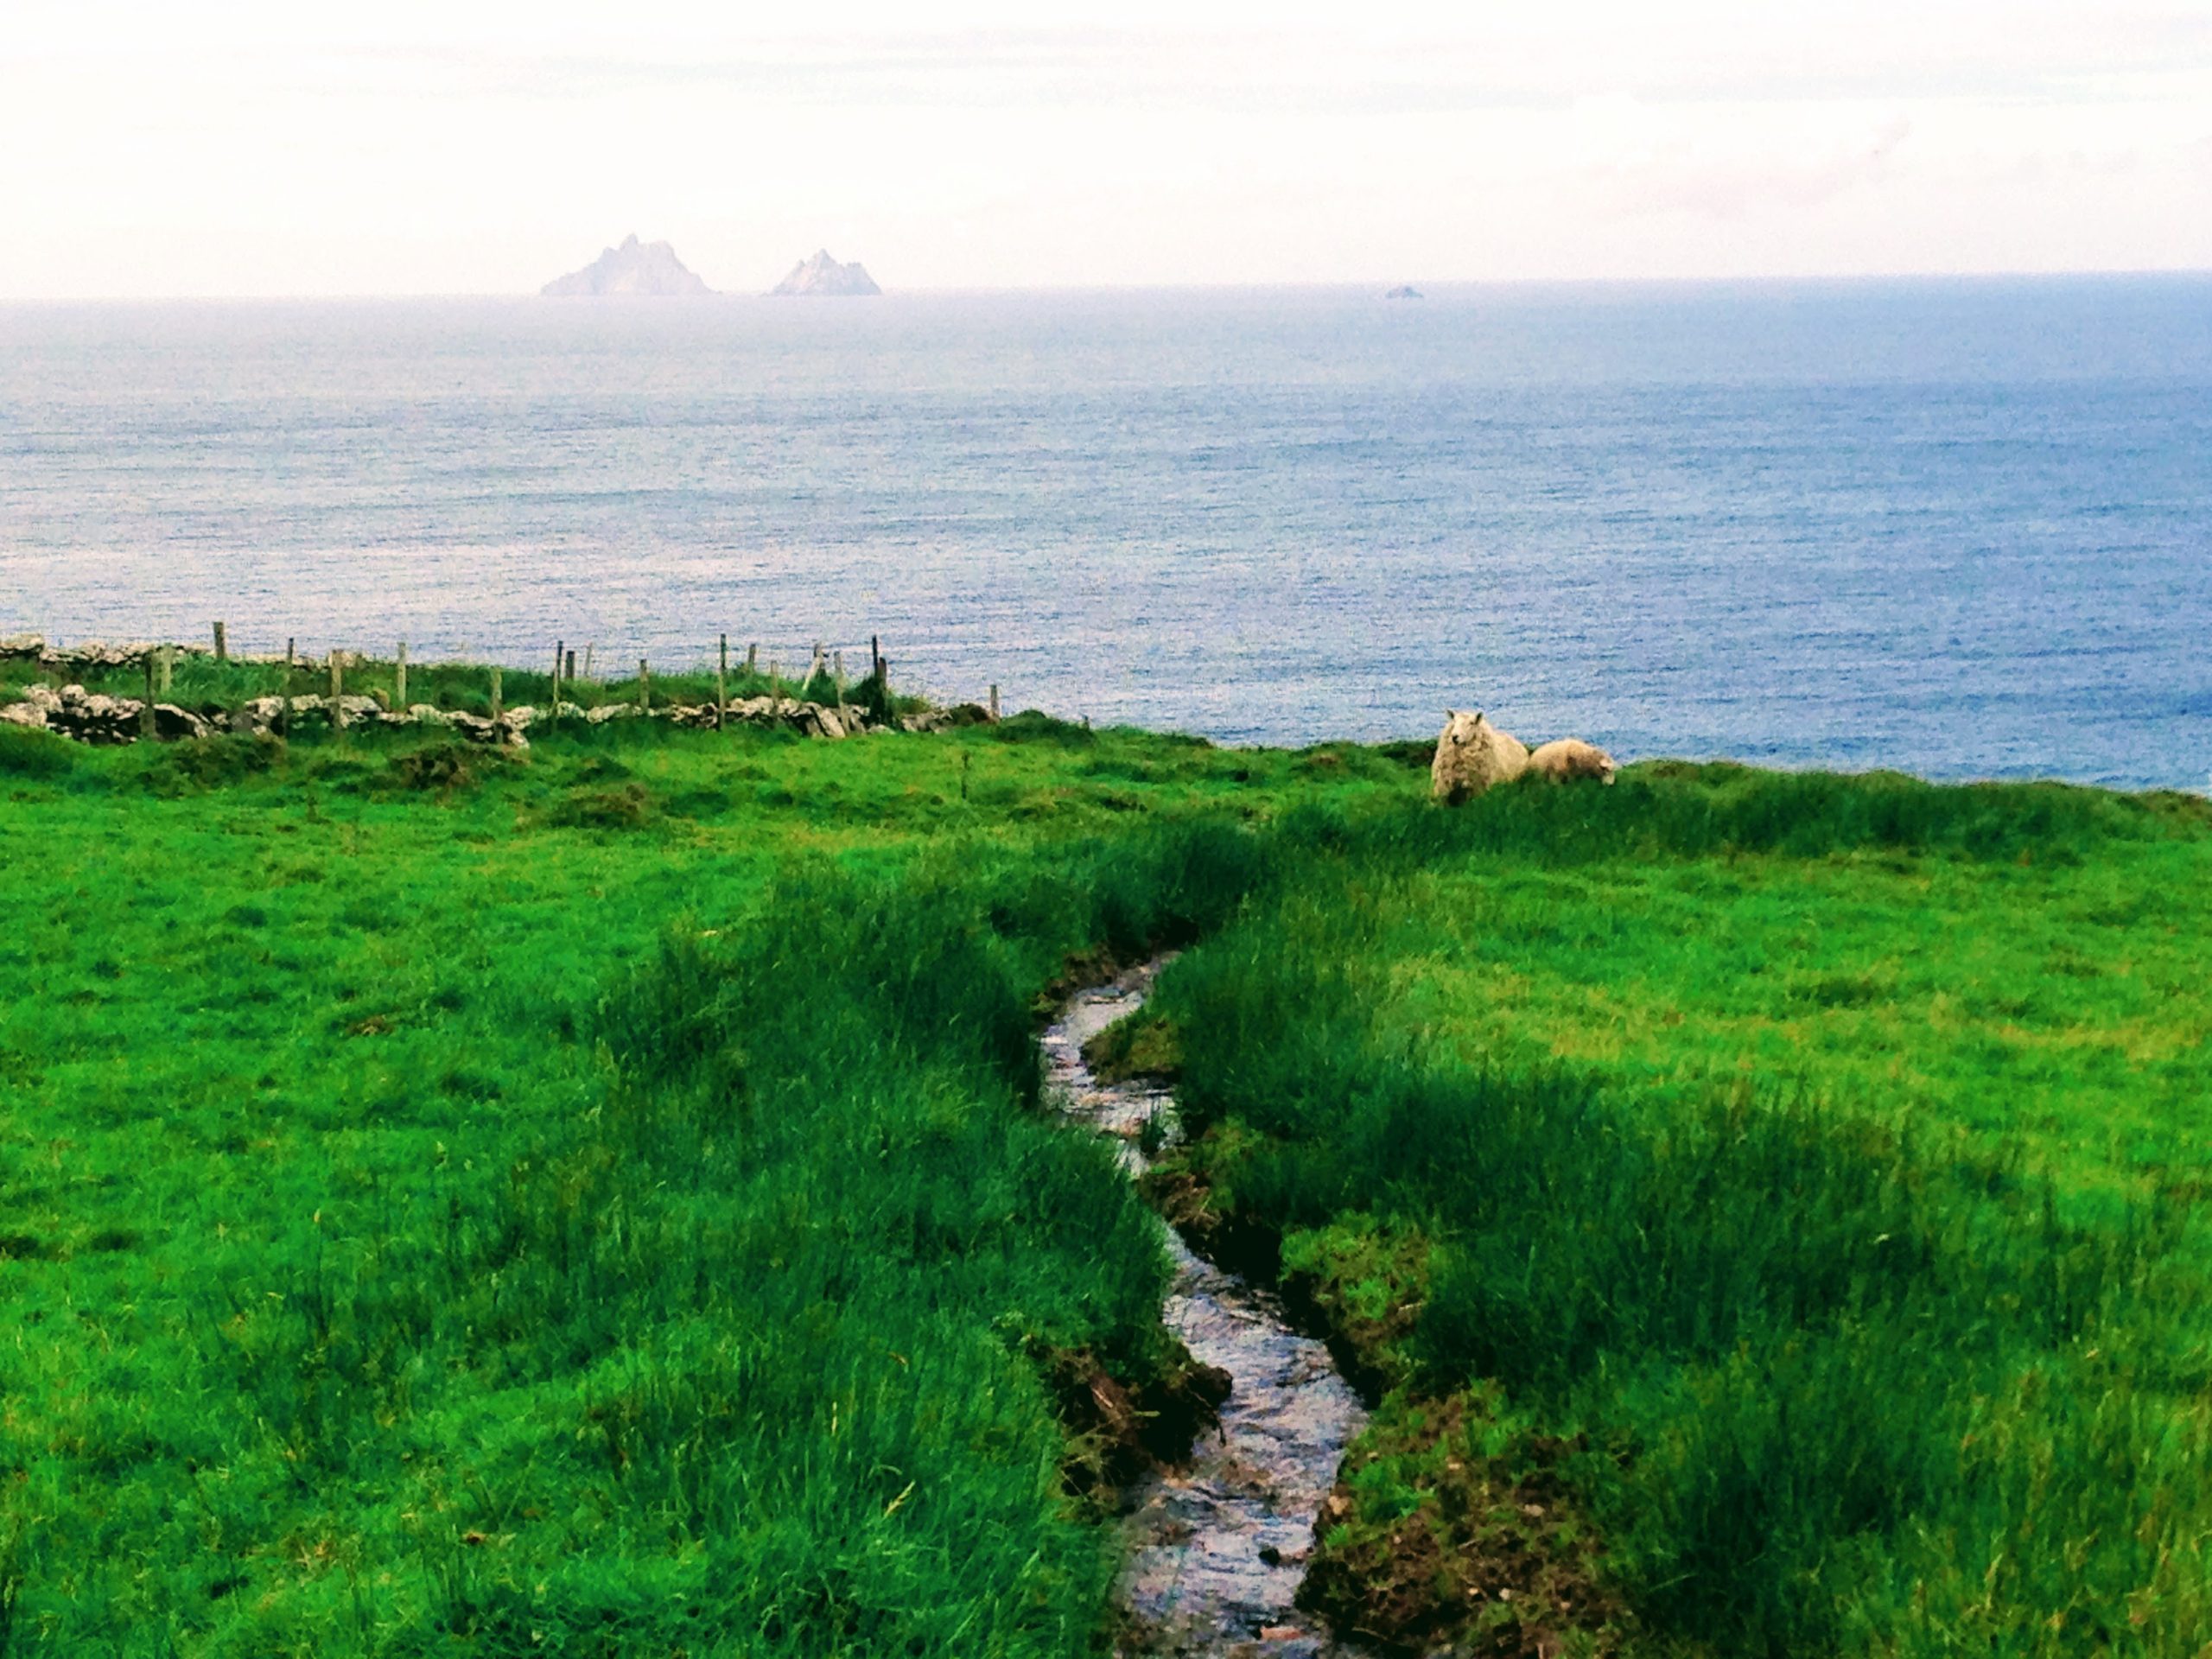 Sheep and Skelligs